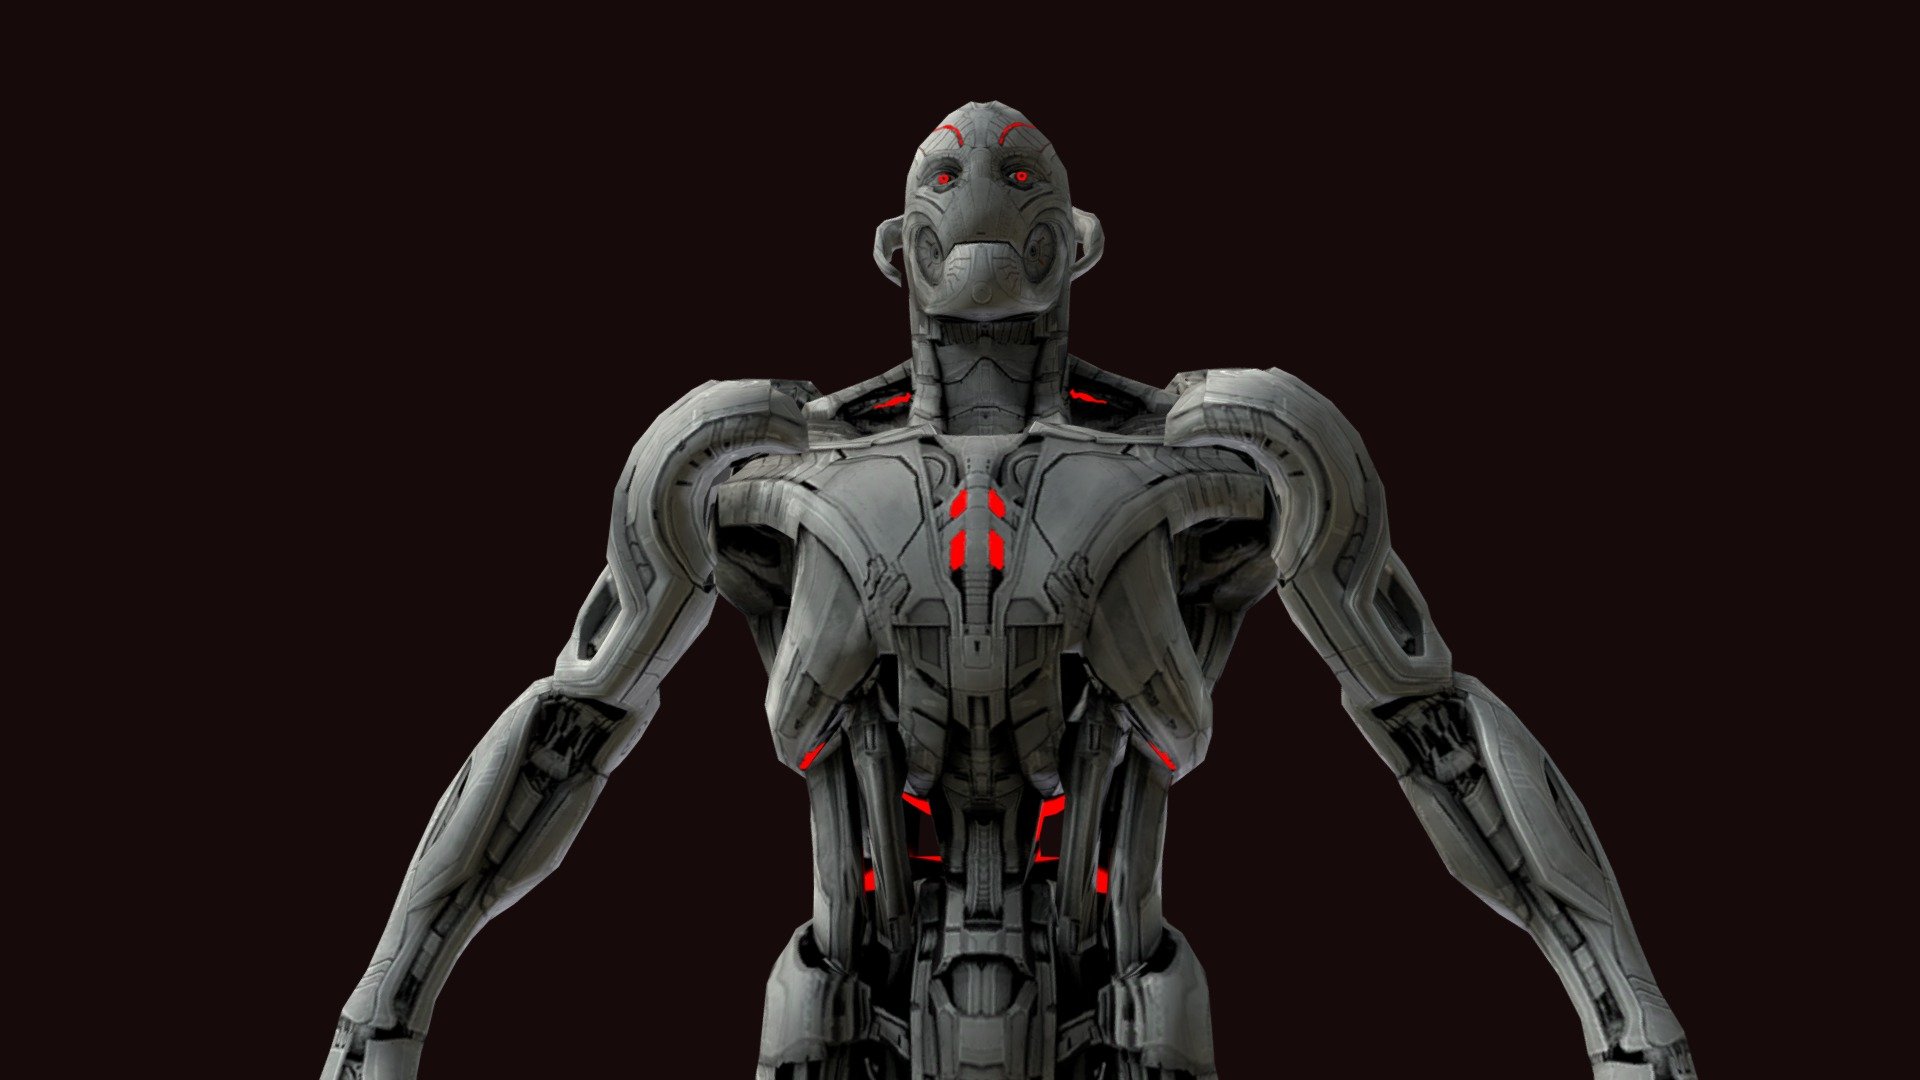 Rigged and textured ULTRON model

Full body rigg and face flexes
Perfect for animations and fanimations - ULTRON V2 - Rigged - 3D model by BOSSposes (@bossposes3d) 3d model